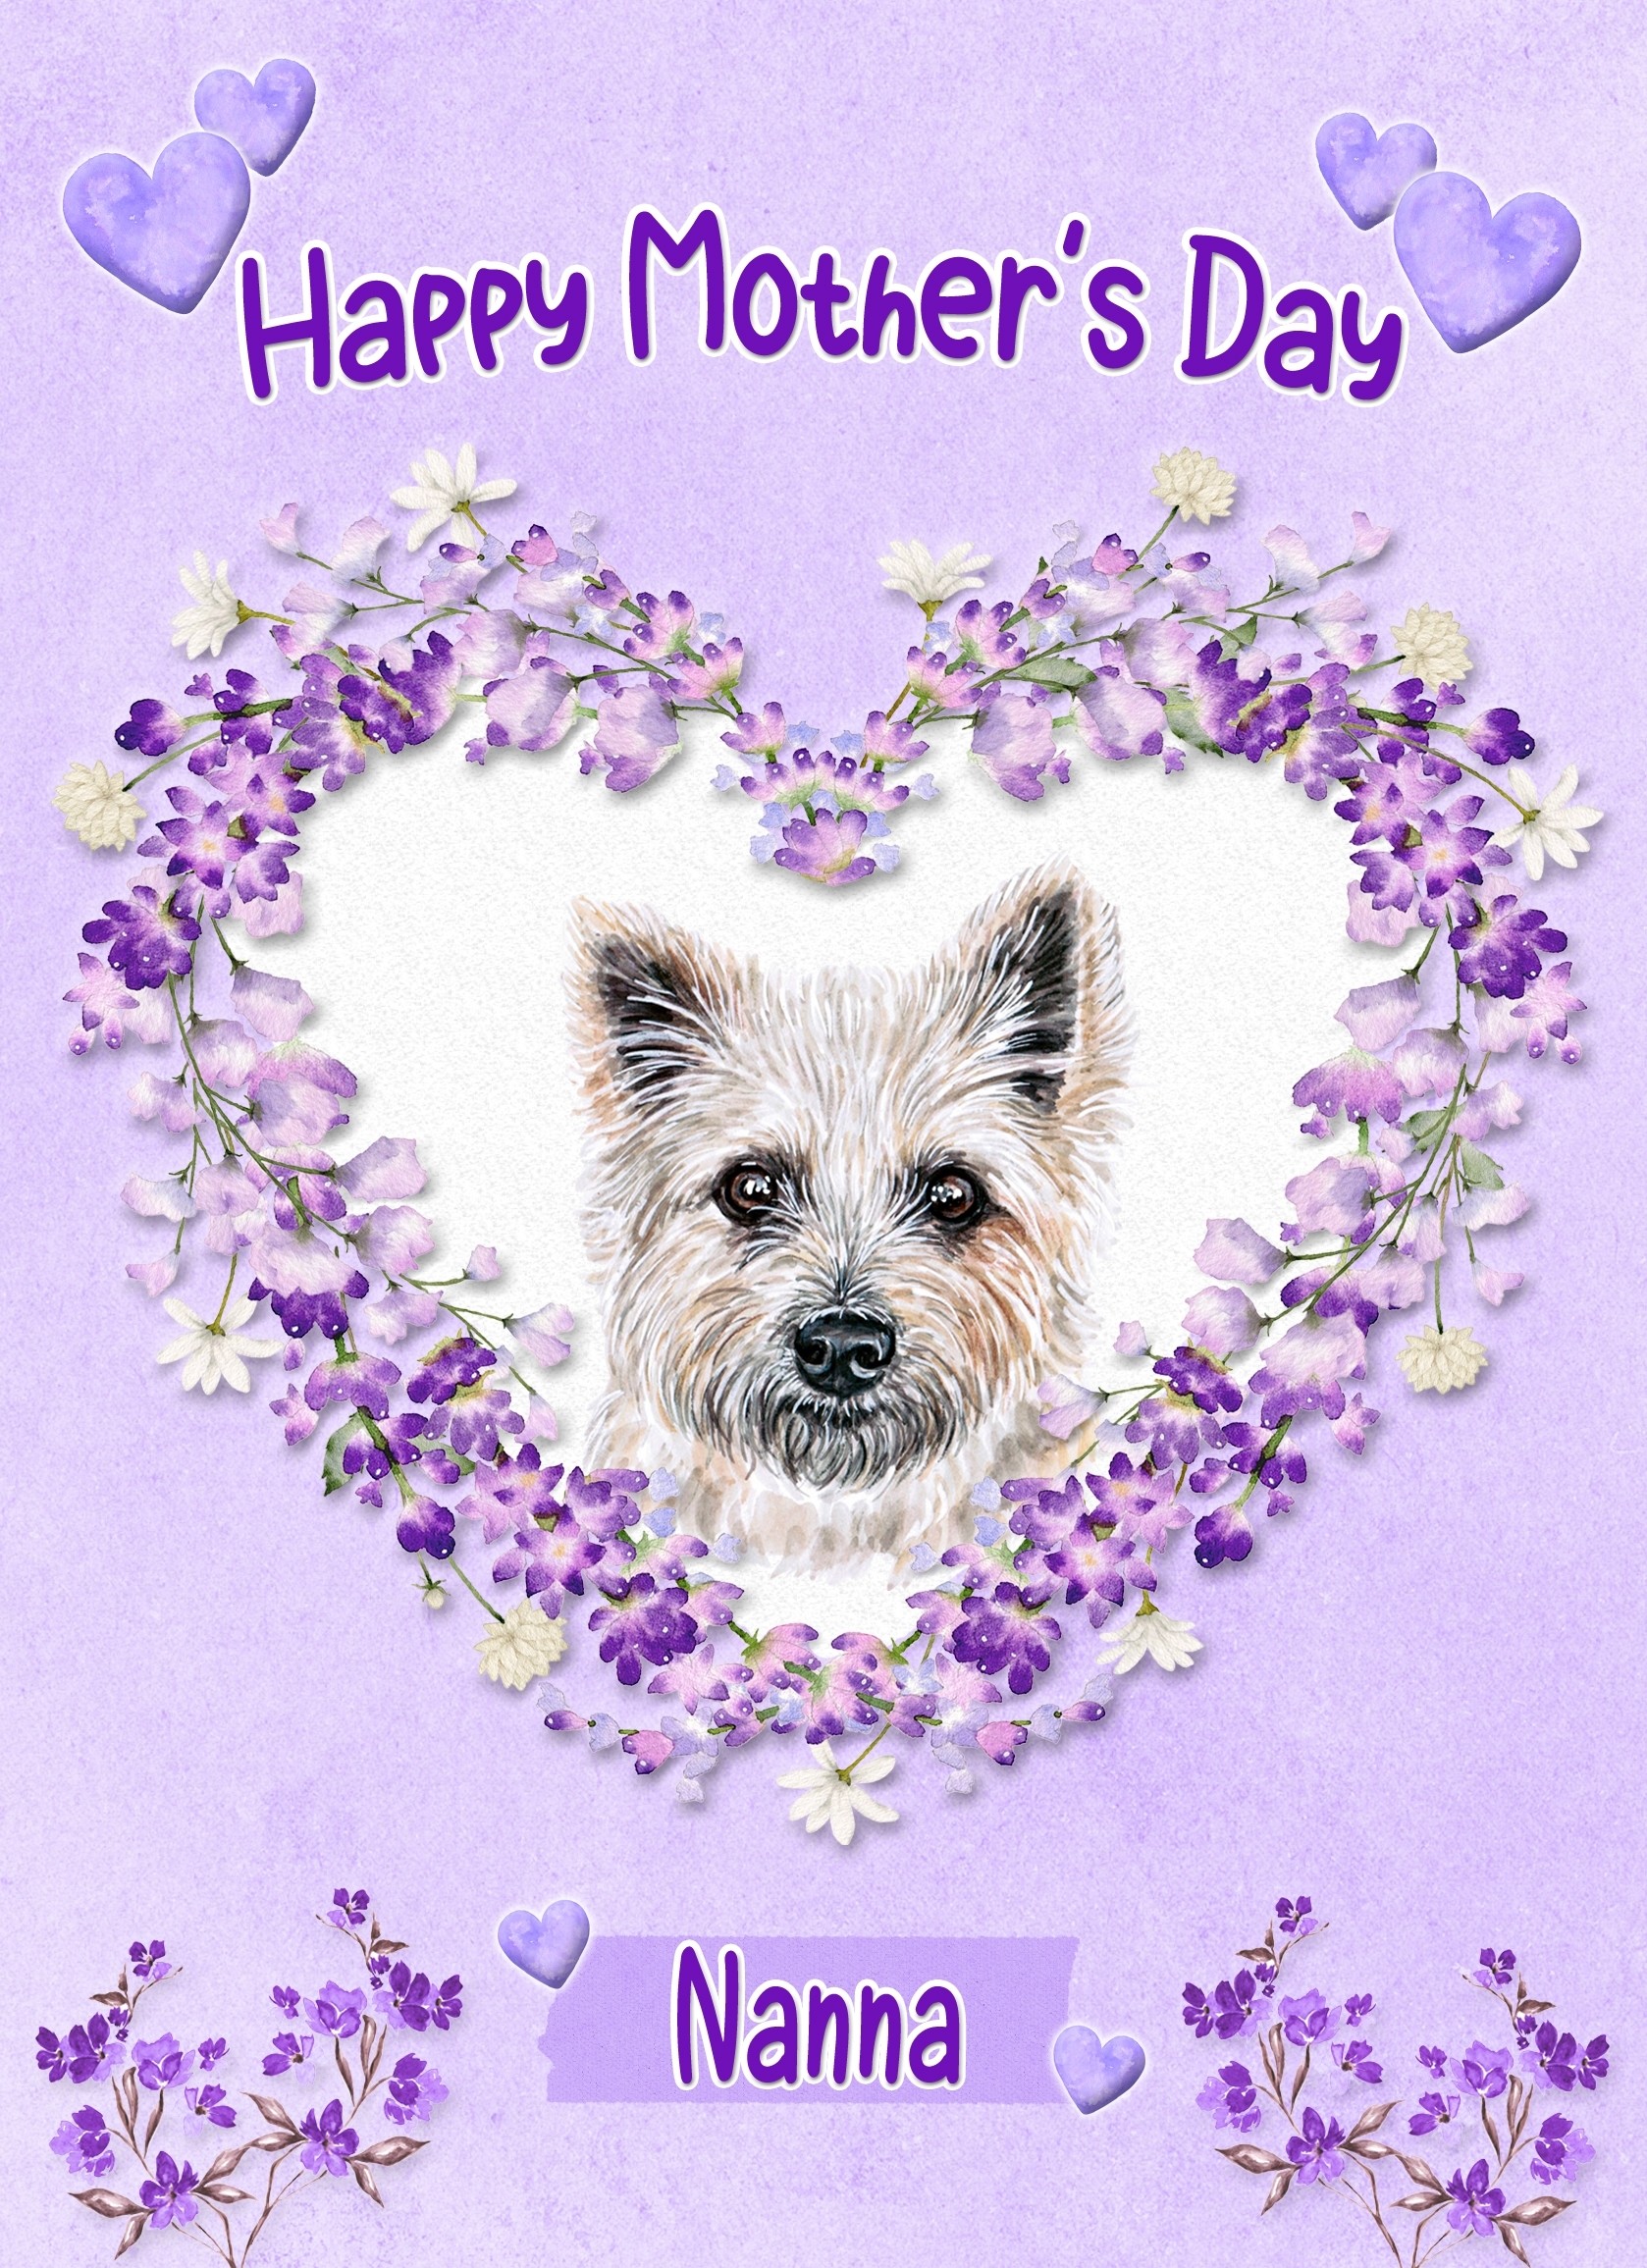 Cairn Terrier Dog Mothers Day Card (Happy Mothers, Nanna)